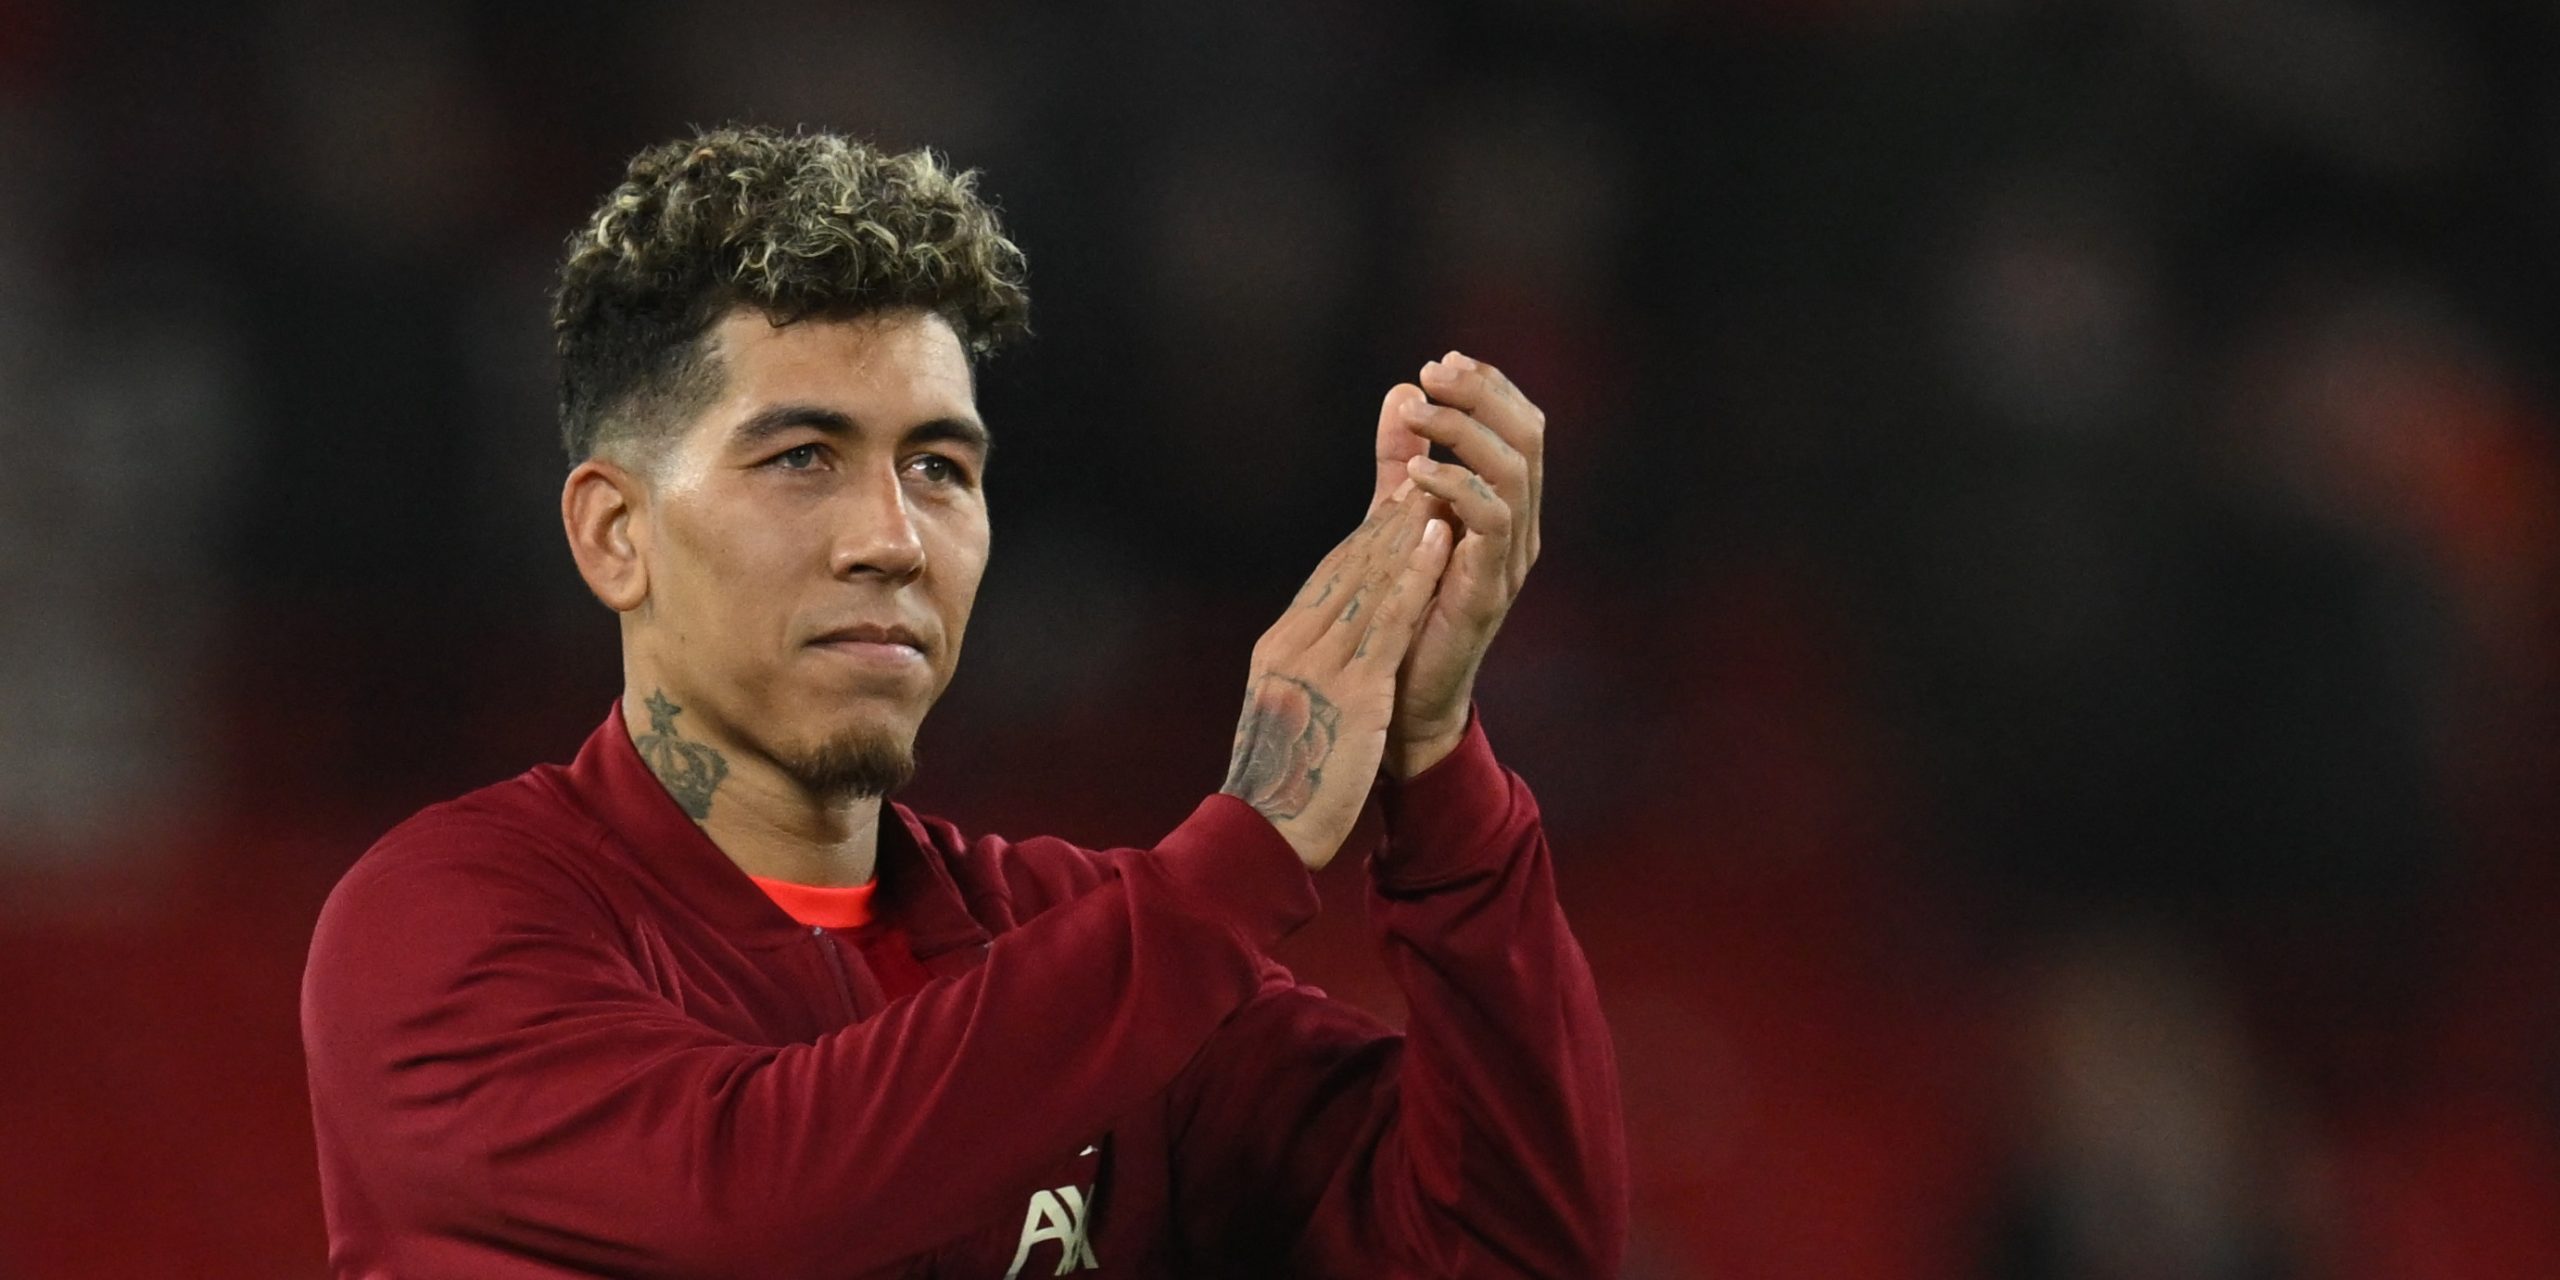 Rumors from Italy and England linked Juventus to Roberto Firmino, but they were disproven. The Bianconeri are looking for a forward, but it won’t be him.